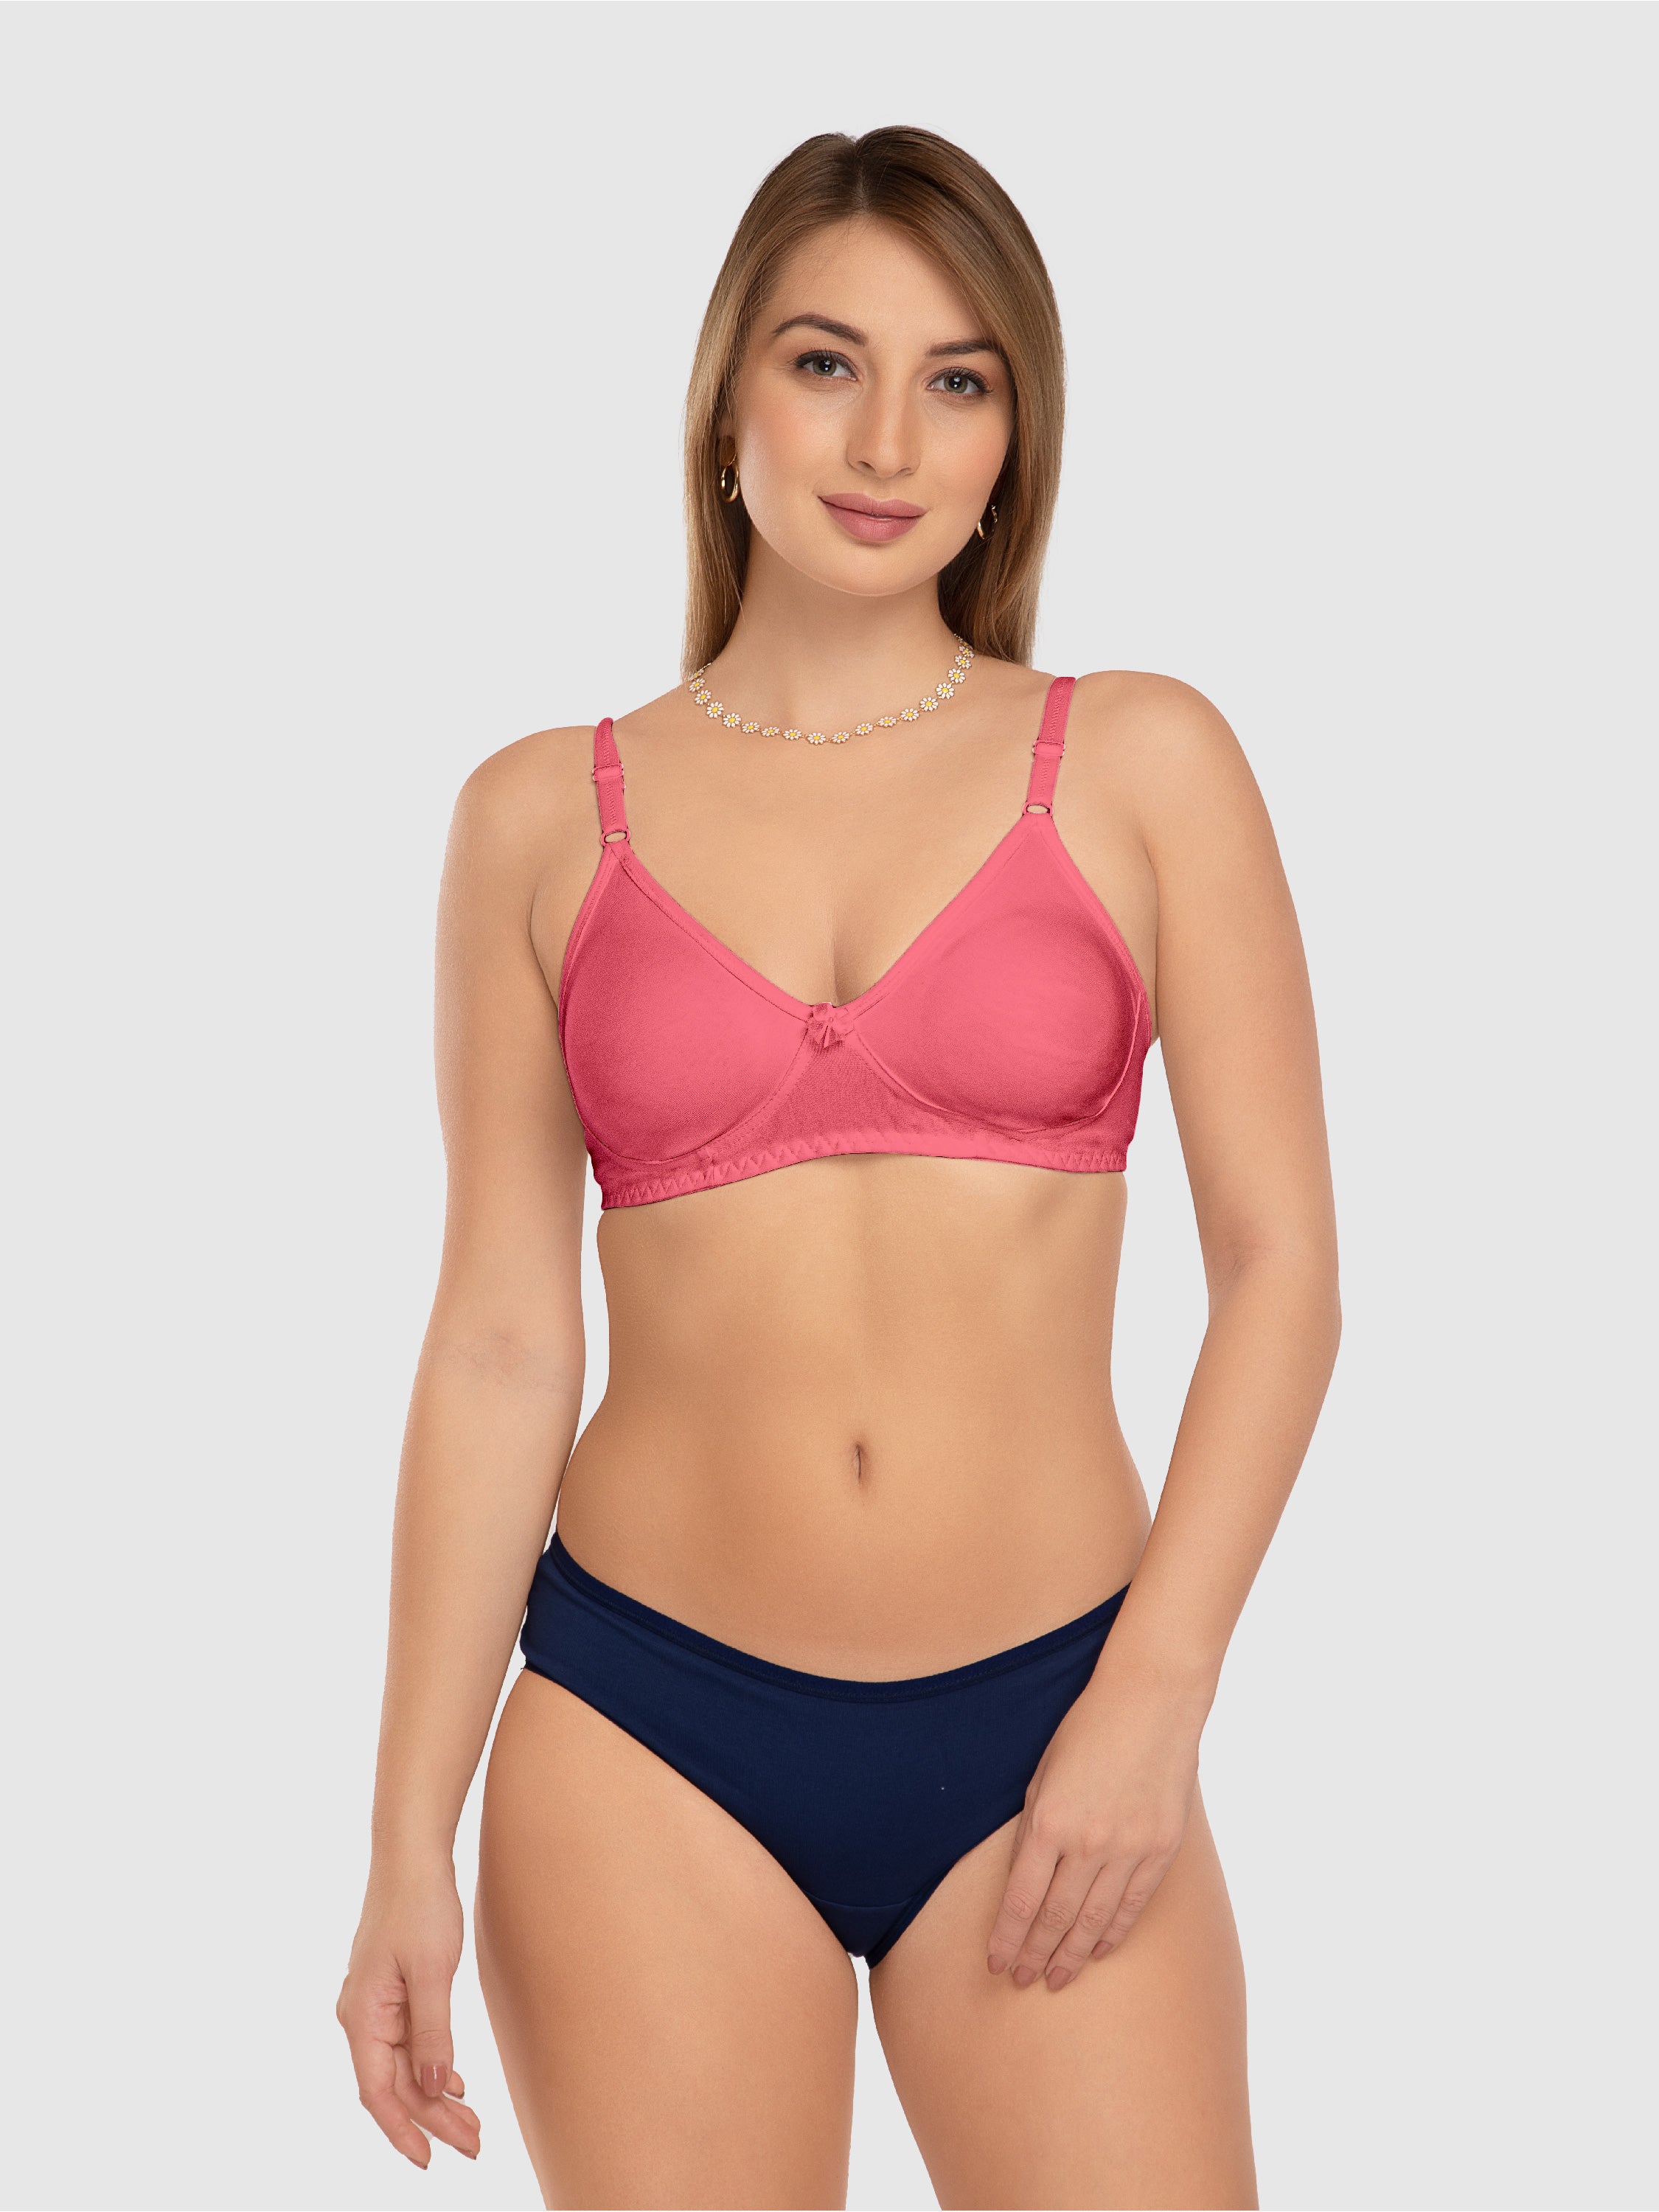 Daisy Dee Carrot Pink Non Padded Non Wired Full Coverage Bra NLBLA-Carrot